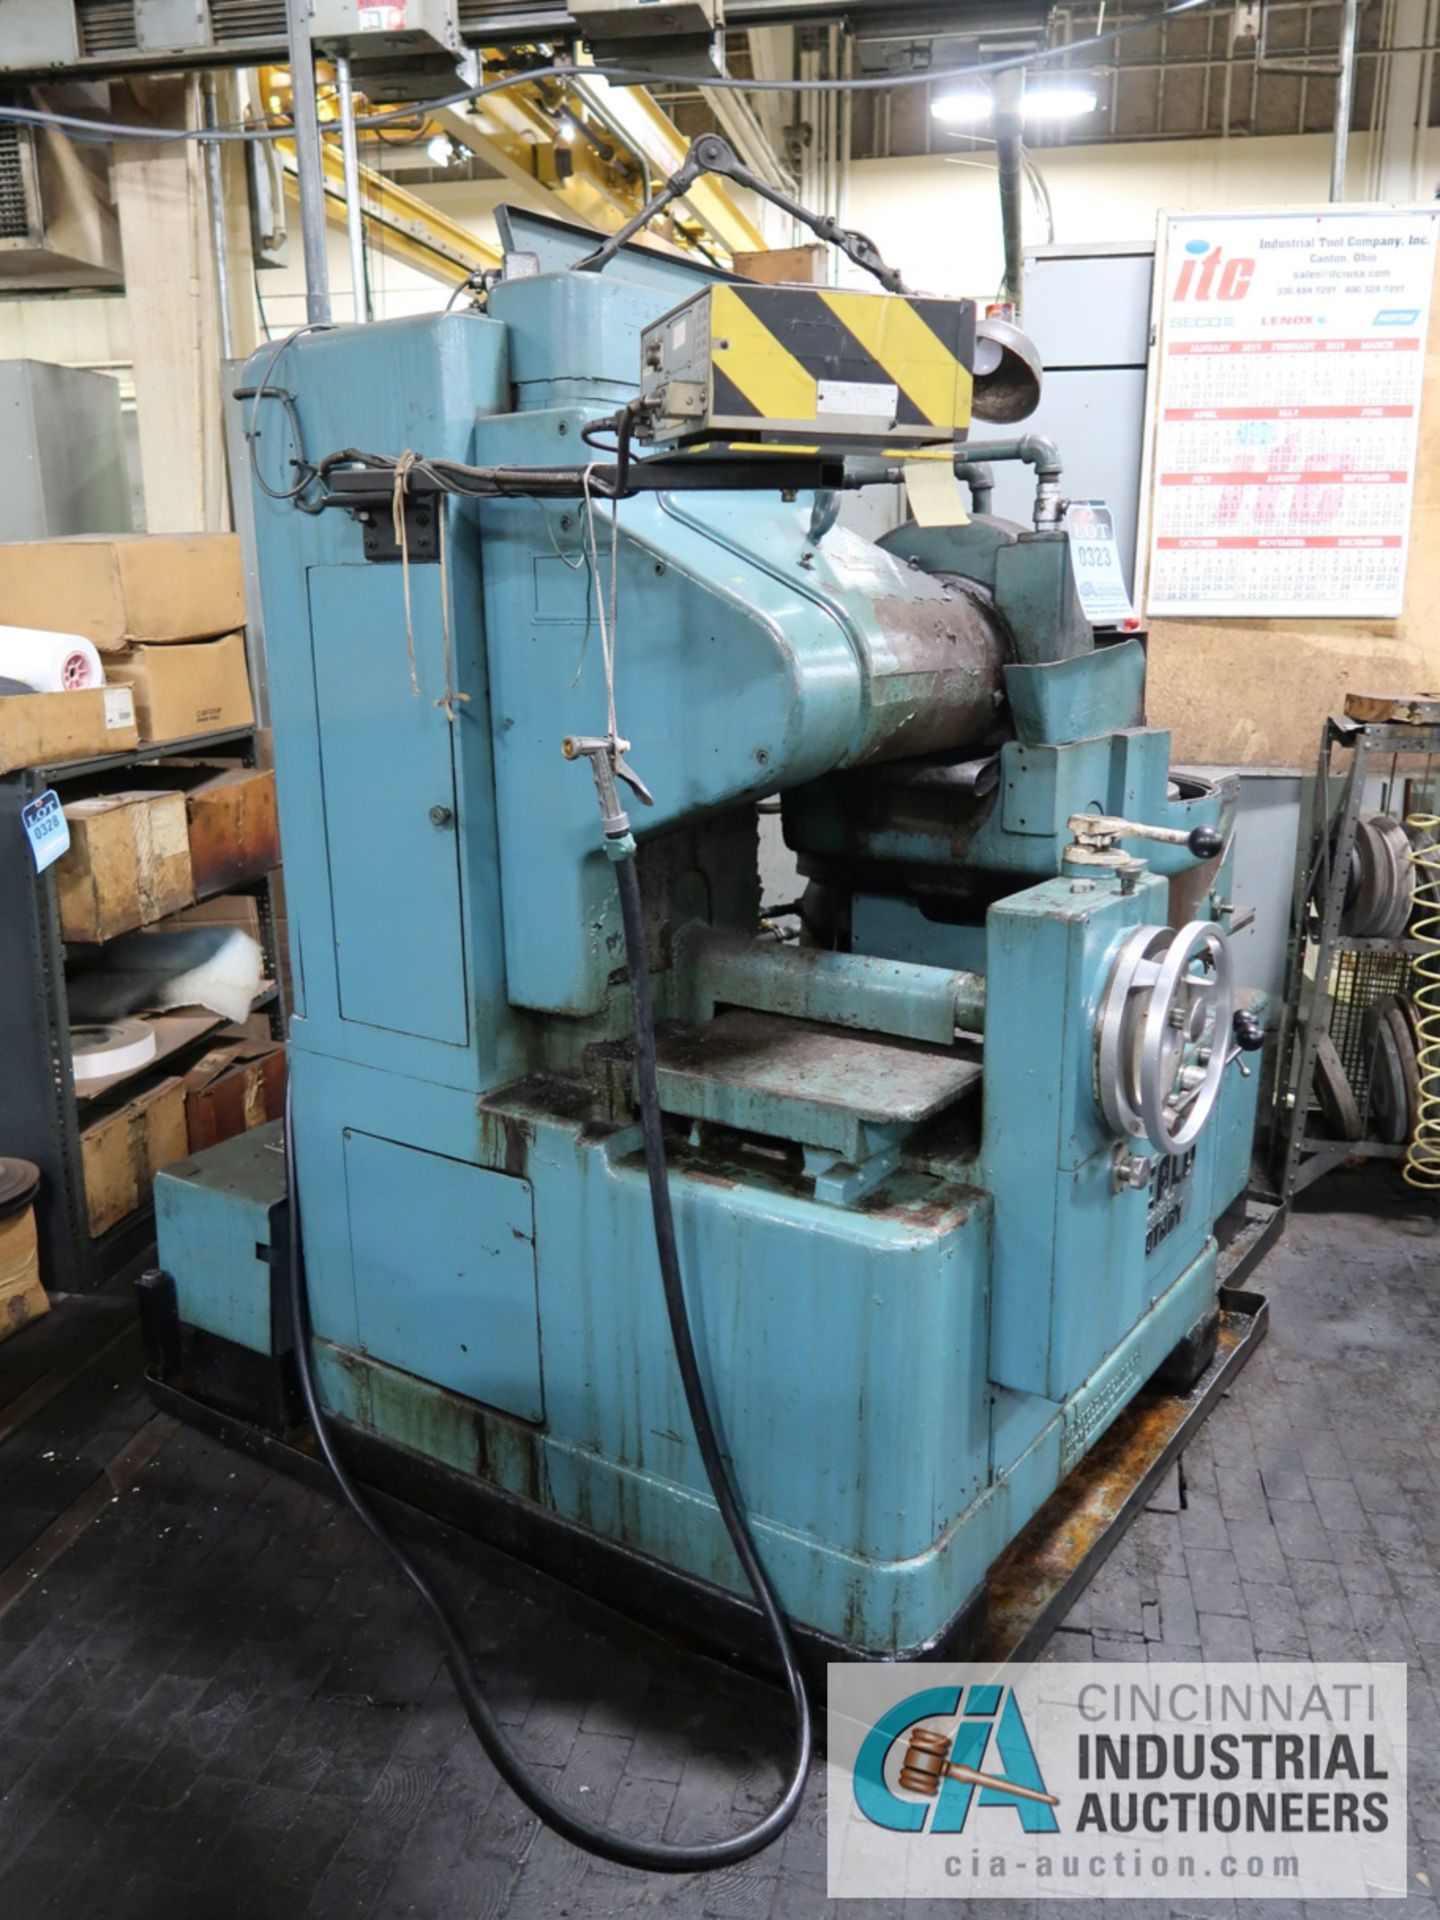 16" HEALD MODEL 261 HORIZONTAL SPINDLE ROTARY SURFACE GRINDER; S/N 30235, 2-AXIS DRO, OS WALKER - Image 2 of 7